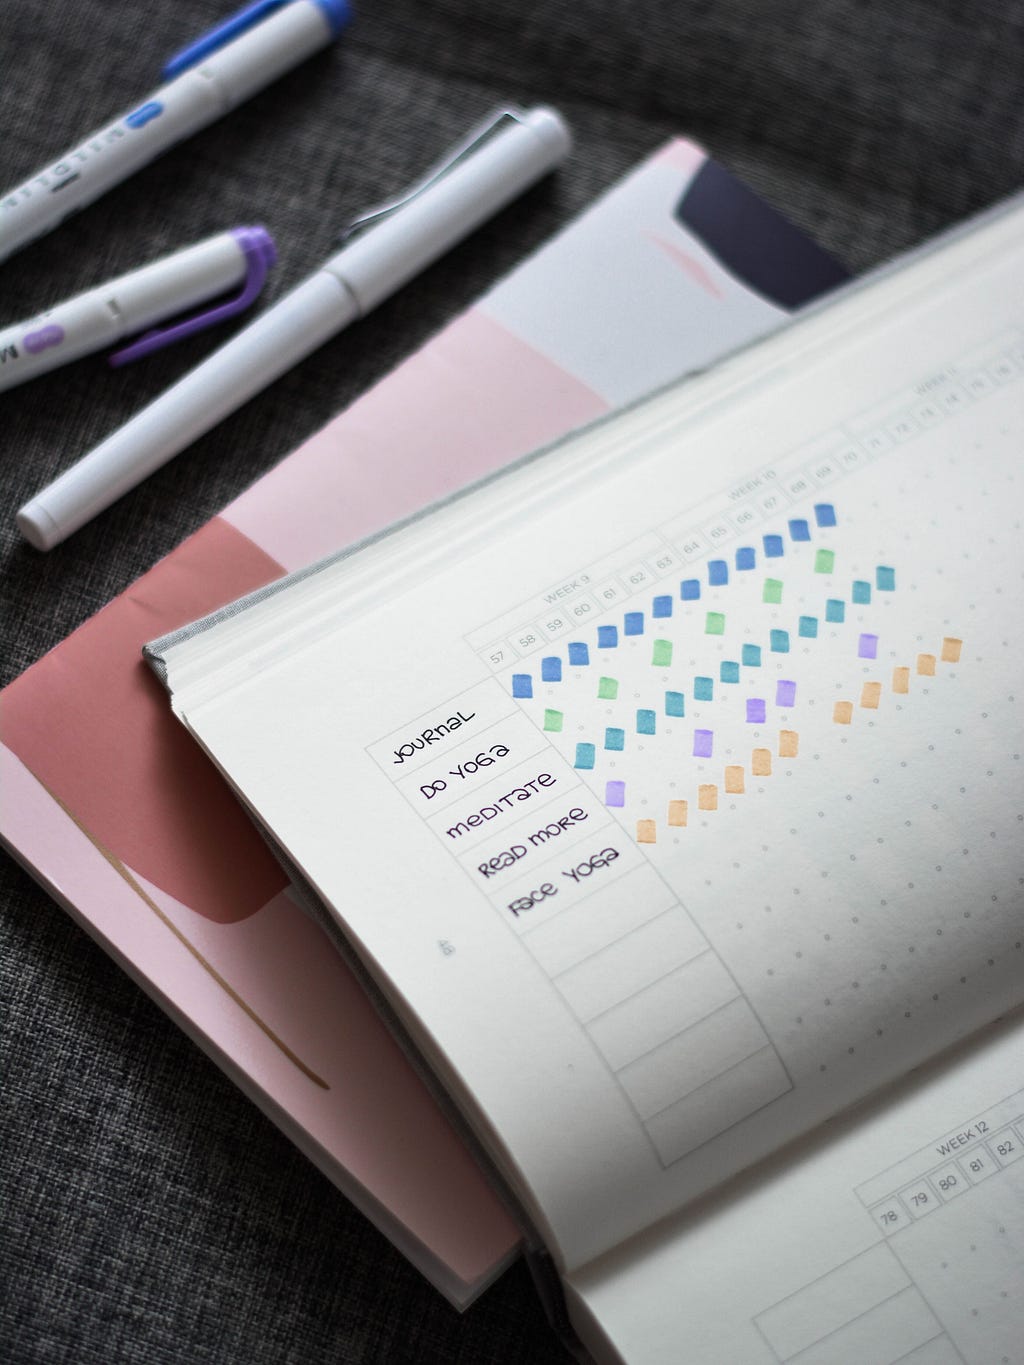 A horizontal habit tracker and “Journal,” “Do yoga,” “Meditate,” “Read more,” and “Face yoga” listed in the habits column. Each habit has been marked off several times in different colors to the right.